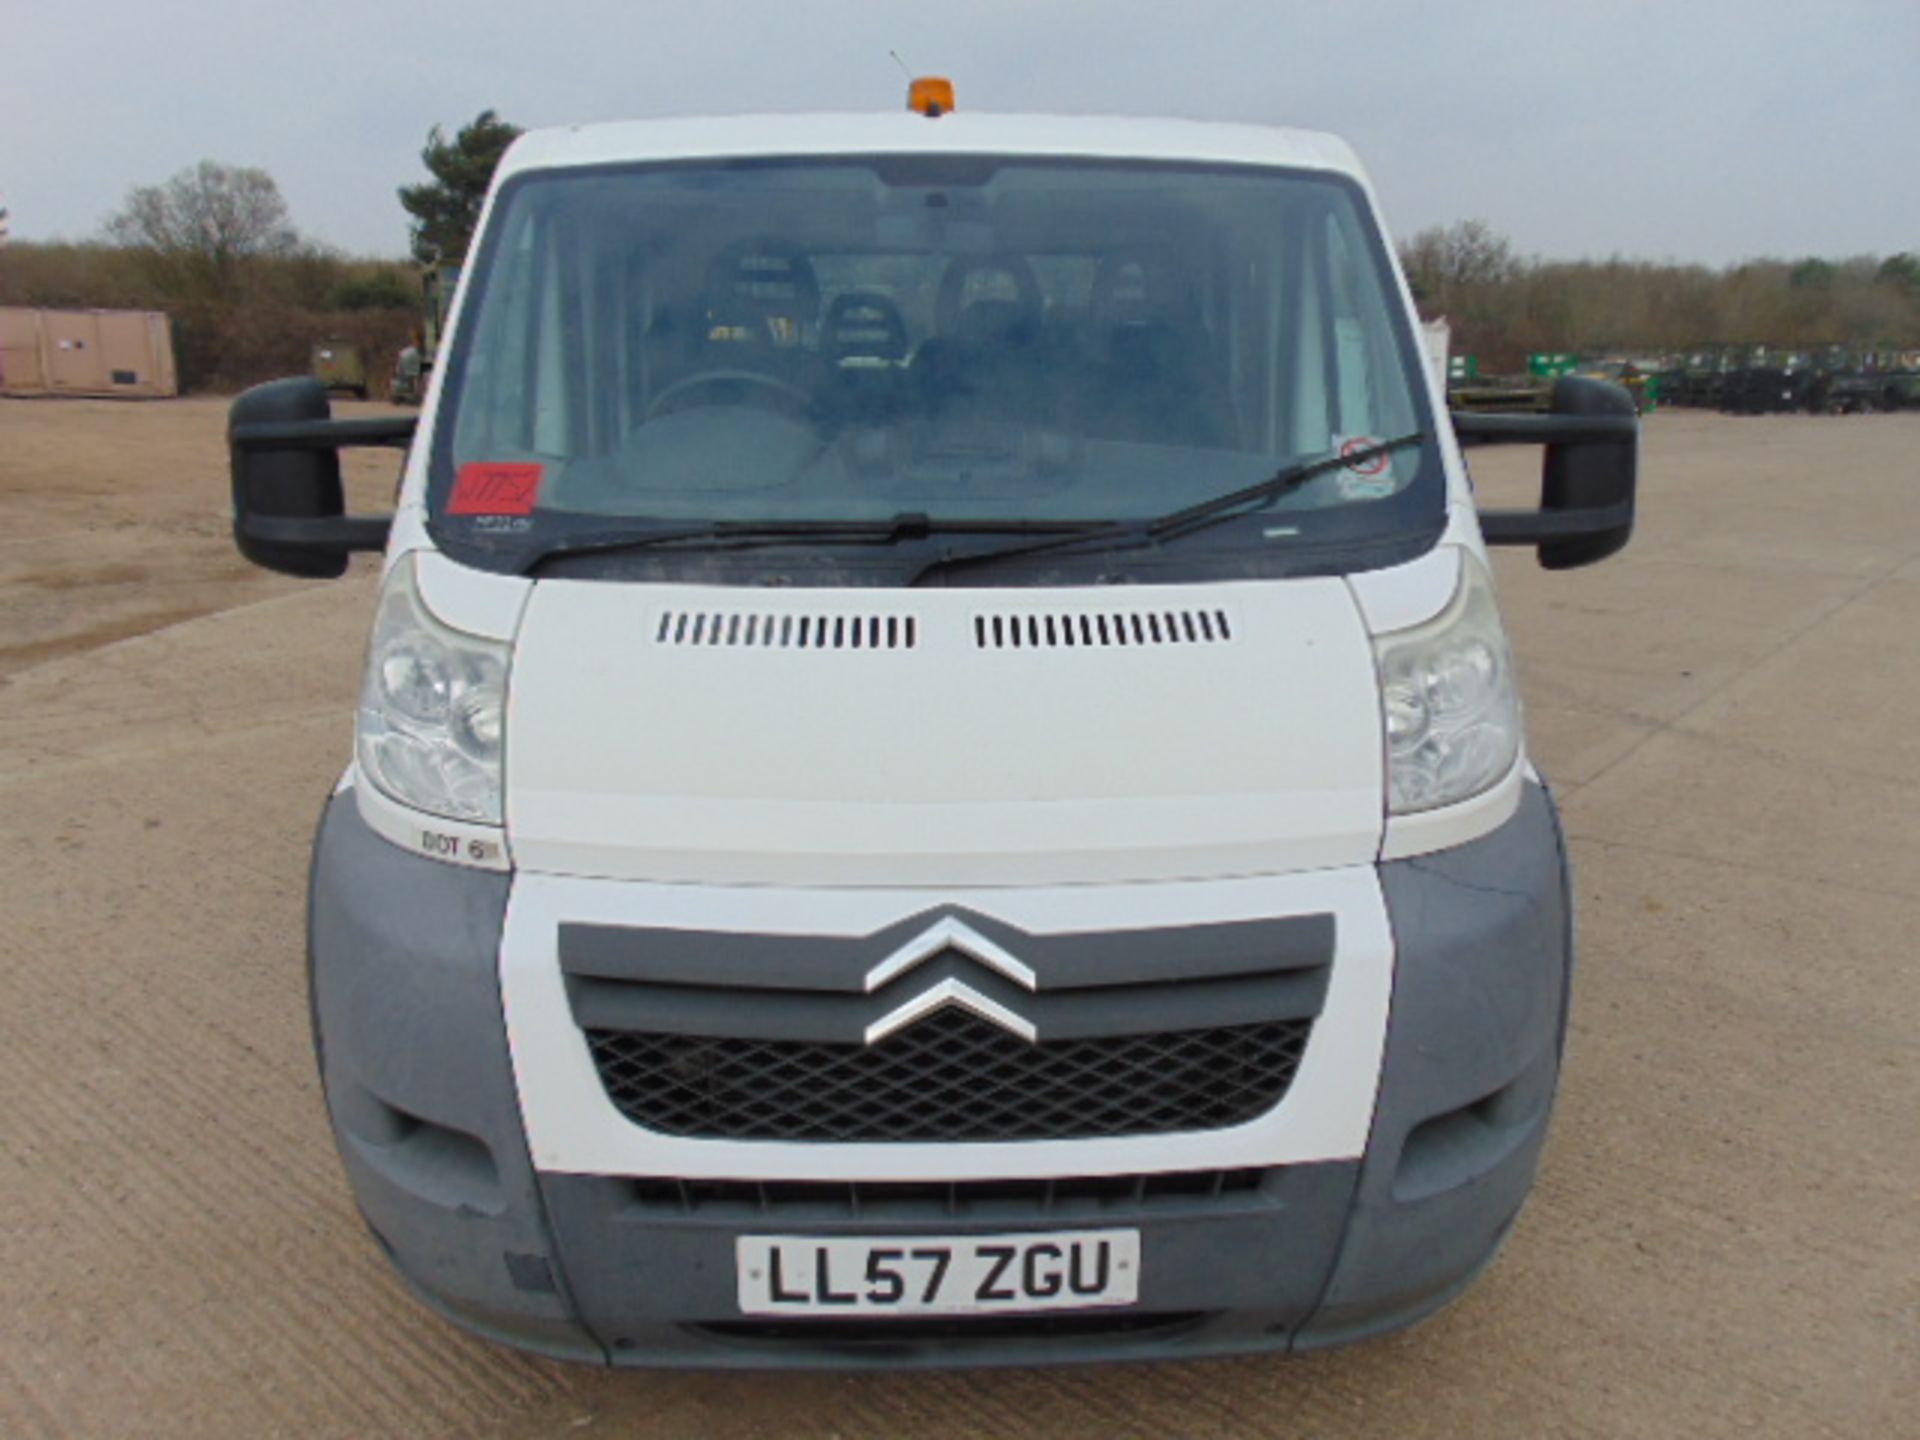 Citroen Relay 7 Seater Double Cab Dropside Pickup with 500kg Ratcliff Palfinger Tail Lift - Image 2 of 27